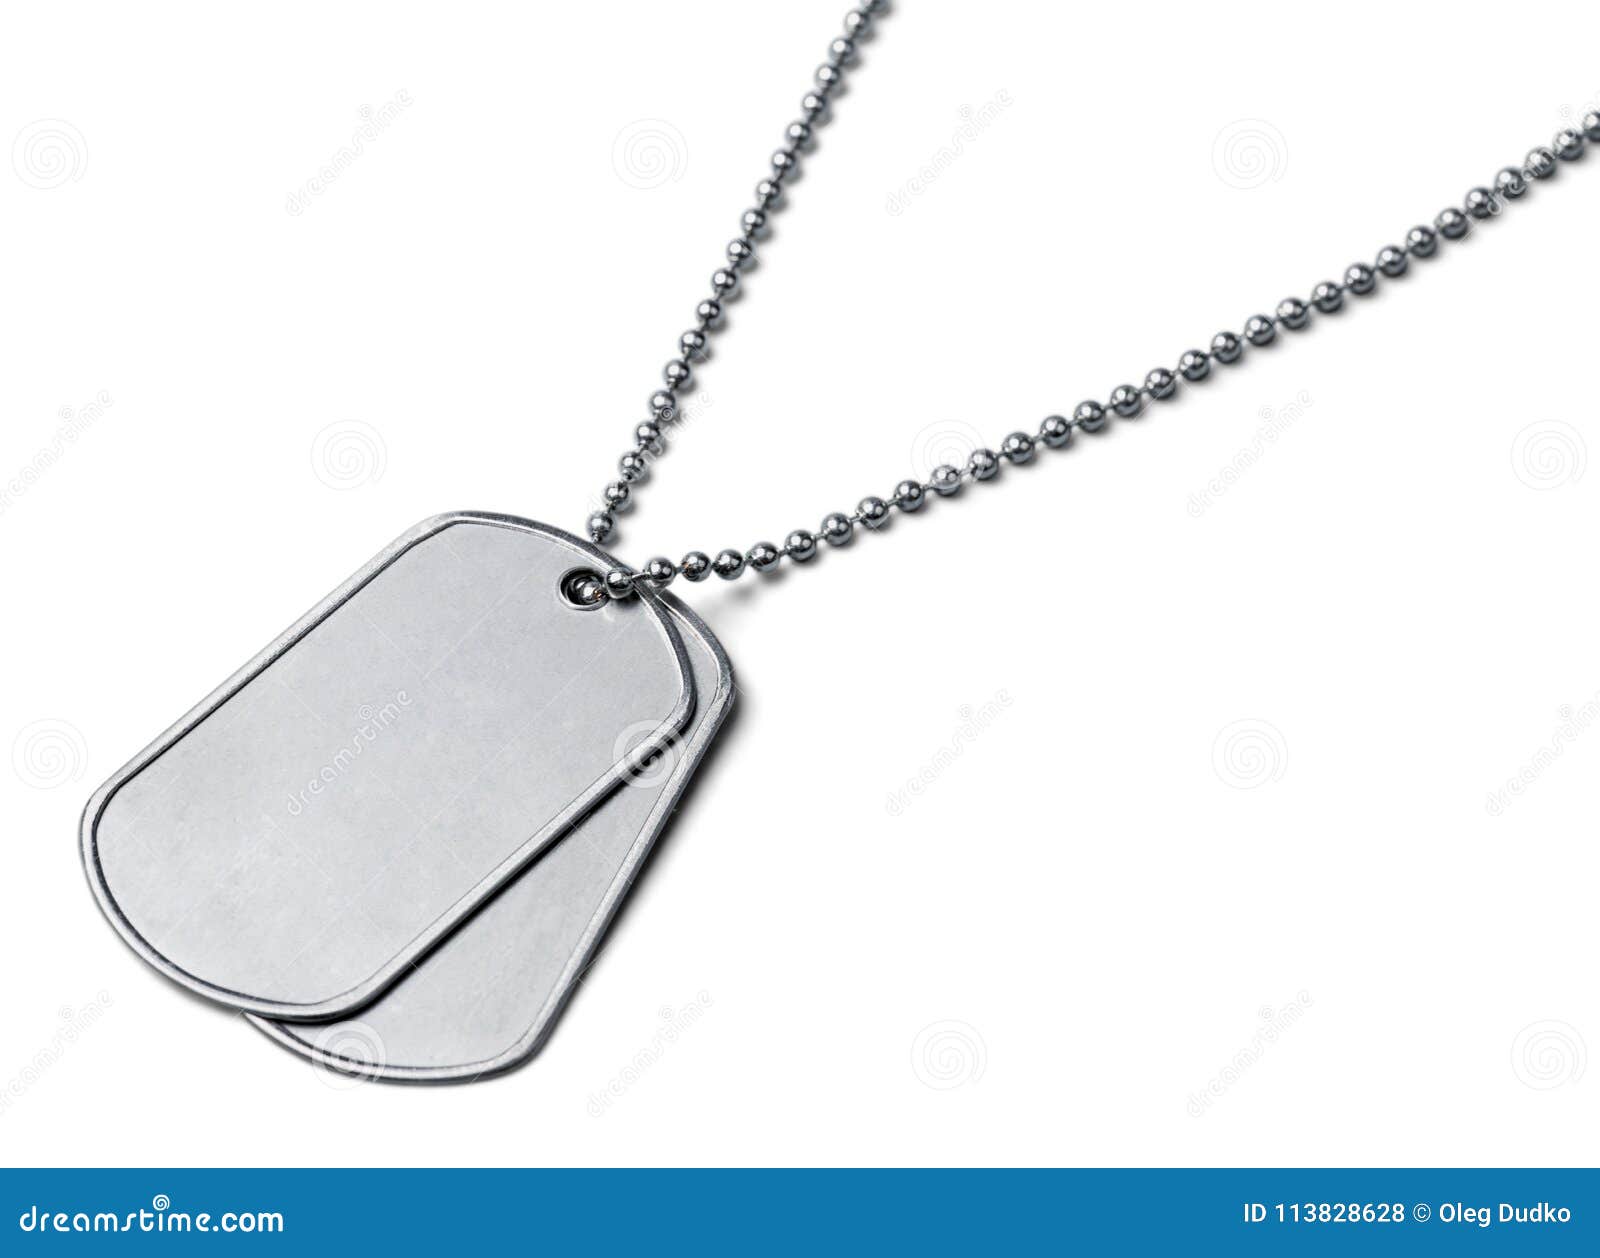 Blank Dog Tags stock photo. Image of silver, blank, marines